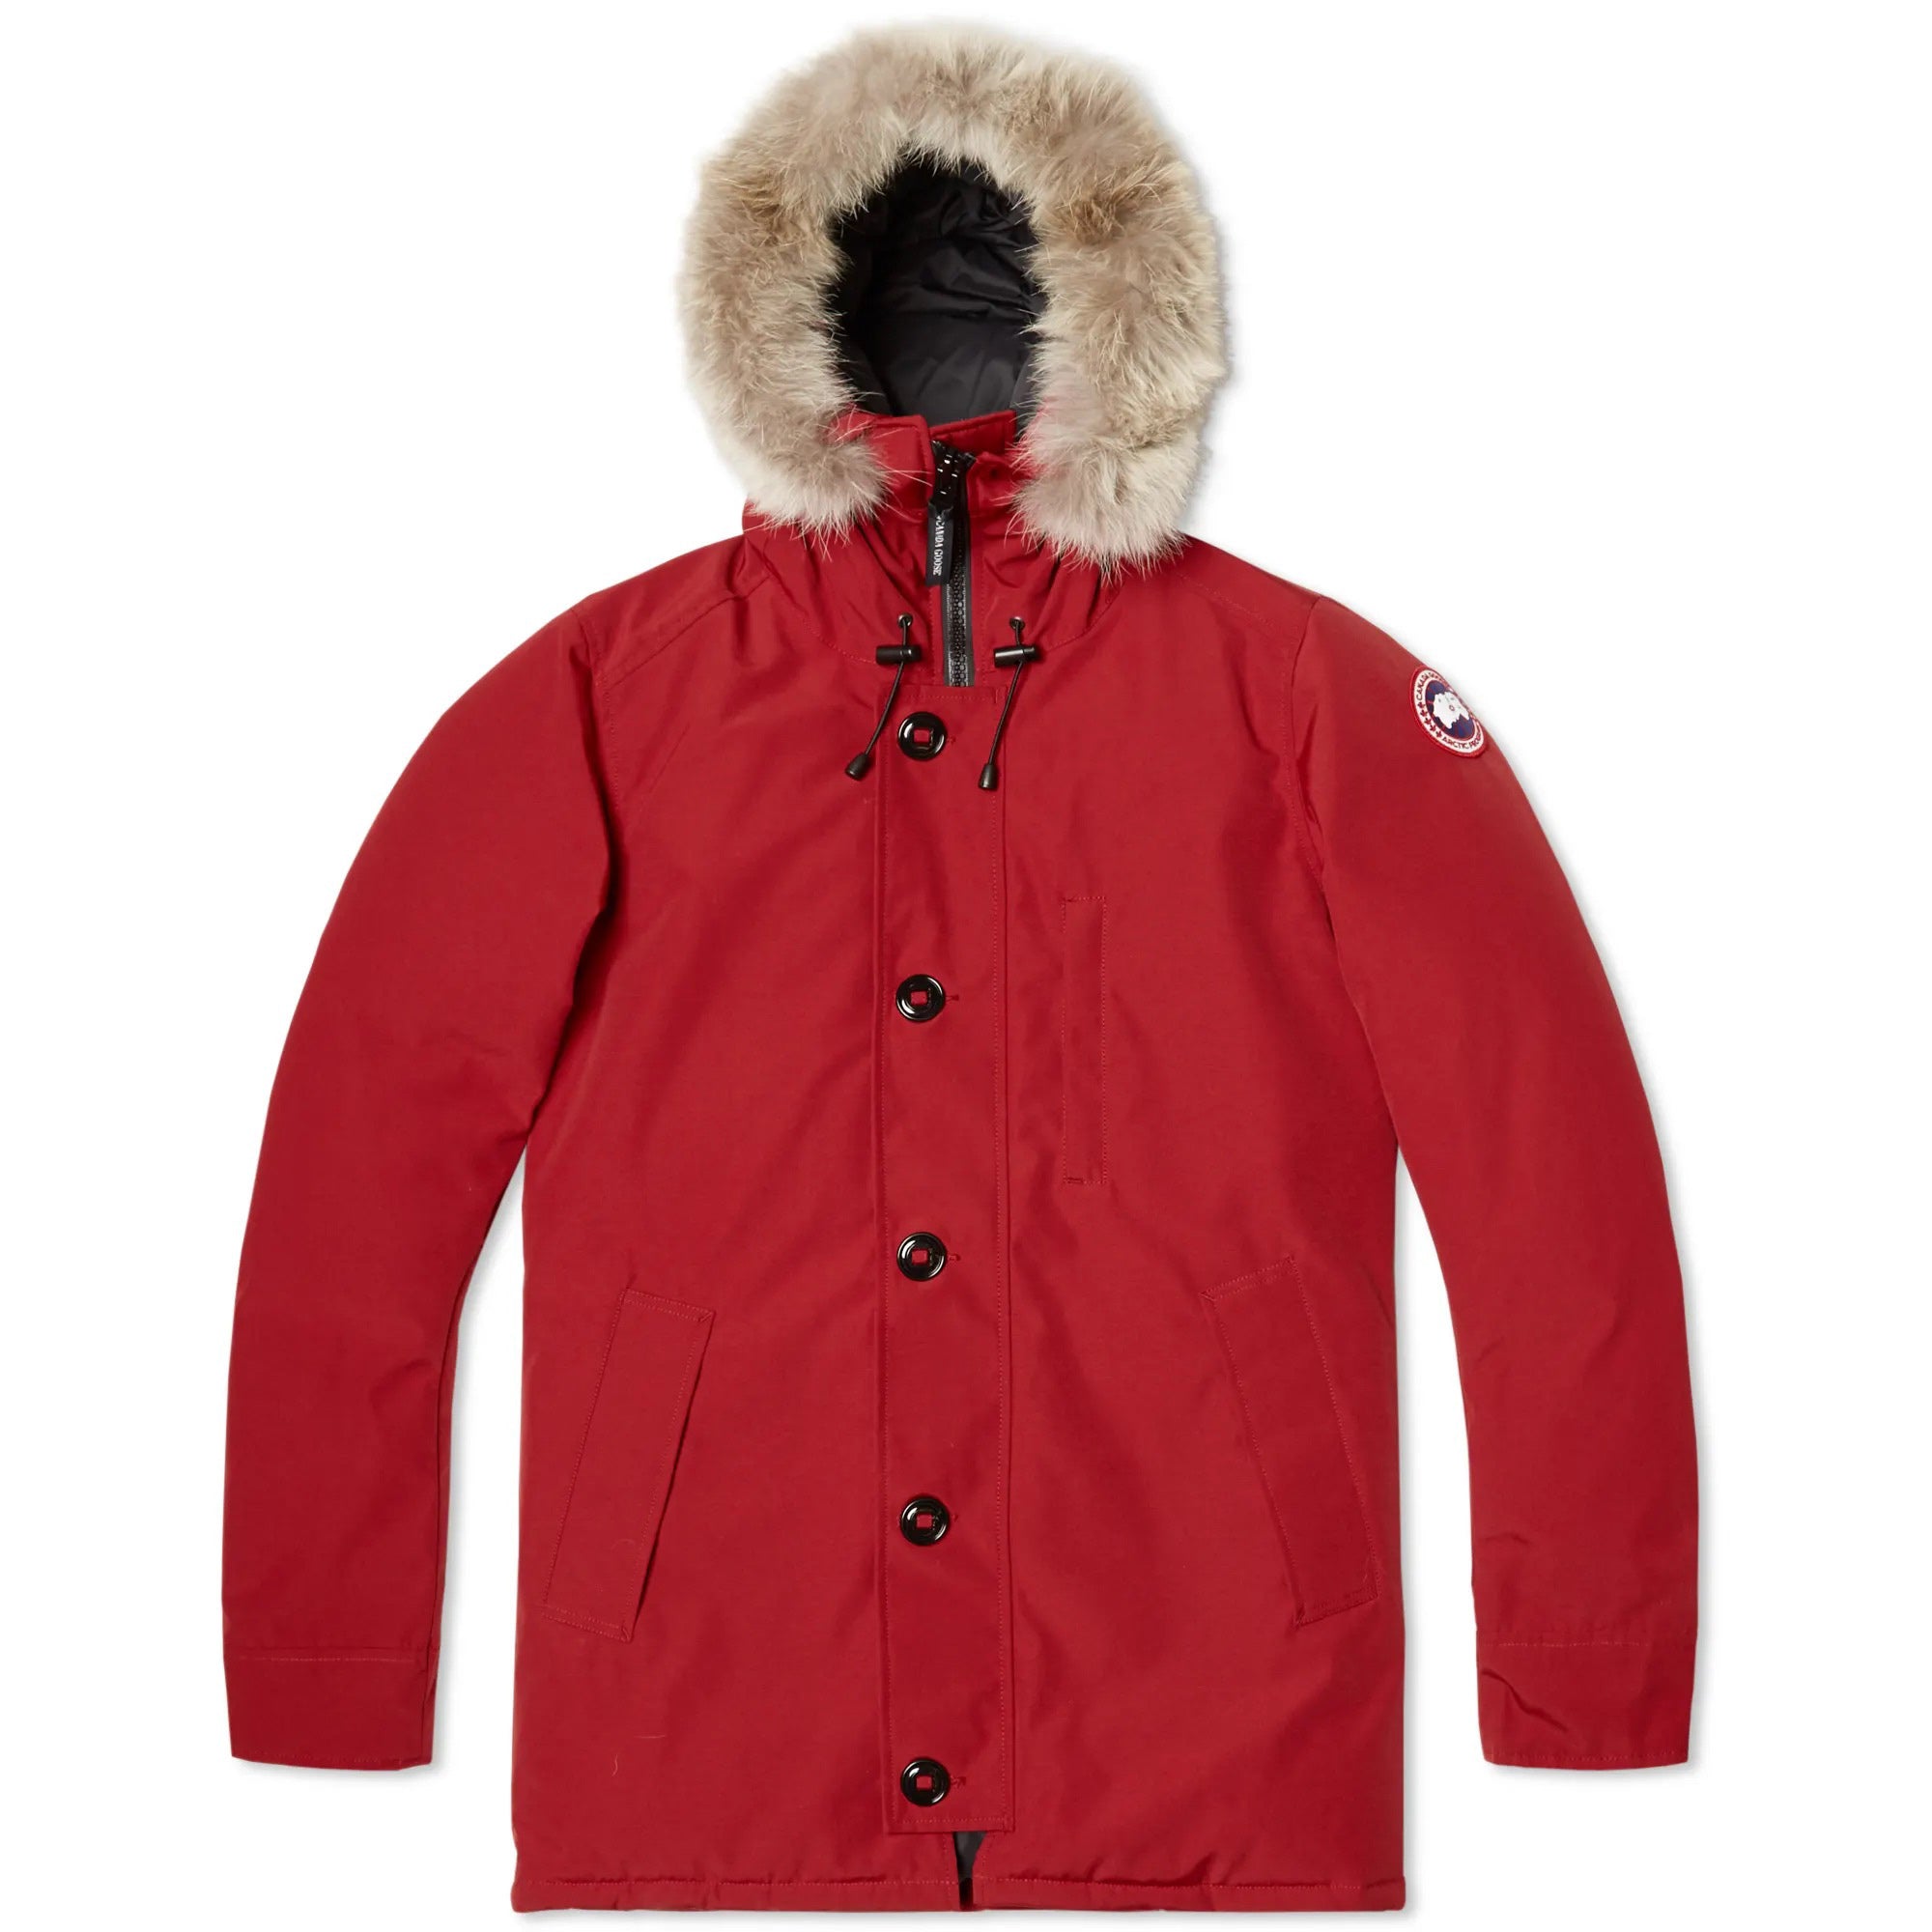 Stay warm and stylish in the Canada Goose Chateau Parka. This parka features a red maple Arctic-Tech shell that is water-resistant and padded for added warmth. The detachable drawstring hood and coyote fur trim provide extra protection against the elements, while the fleece-lined chin guard adds comfort. The dropped shoulders, zipped chest pocket, and side slip pockets offer practical storage options.